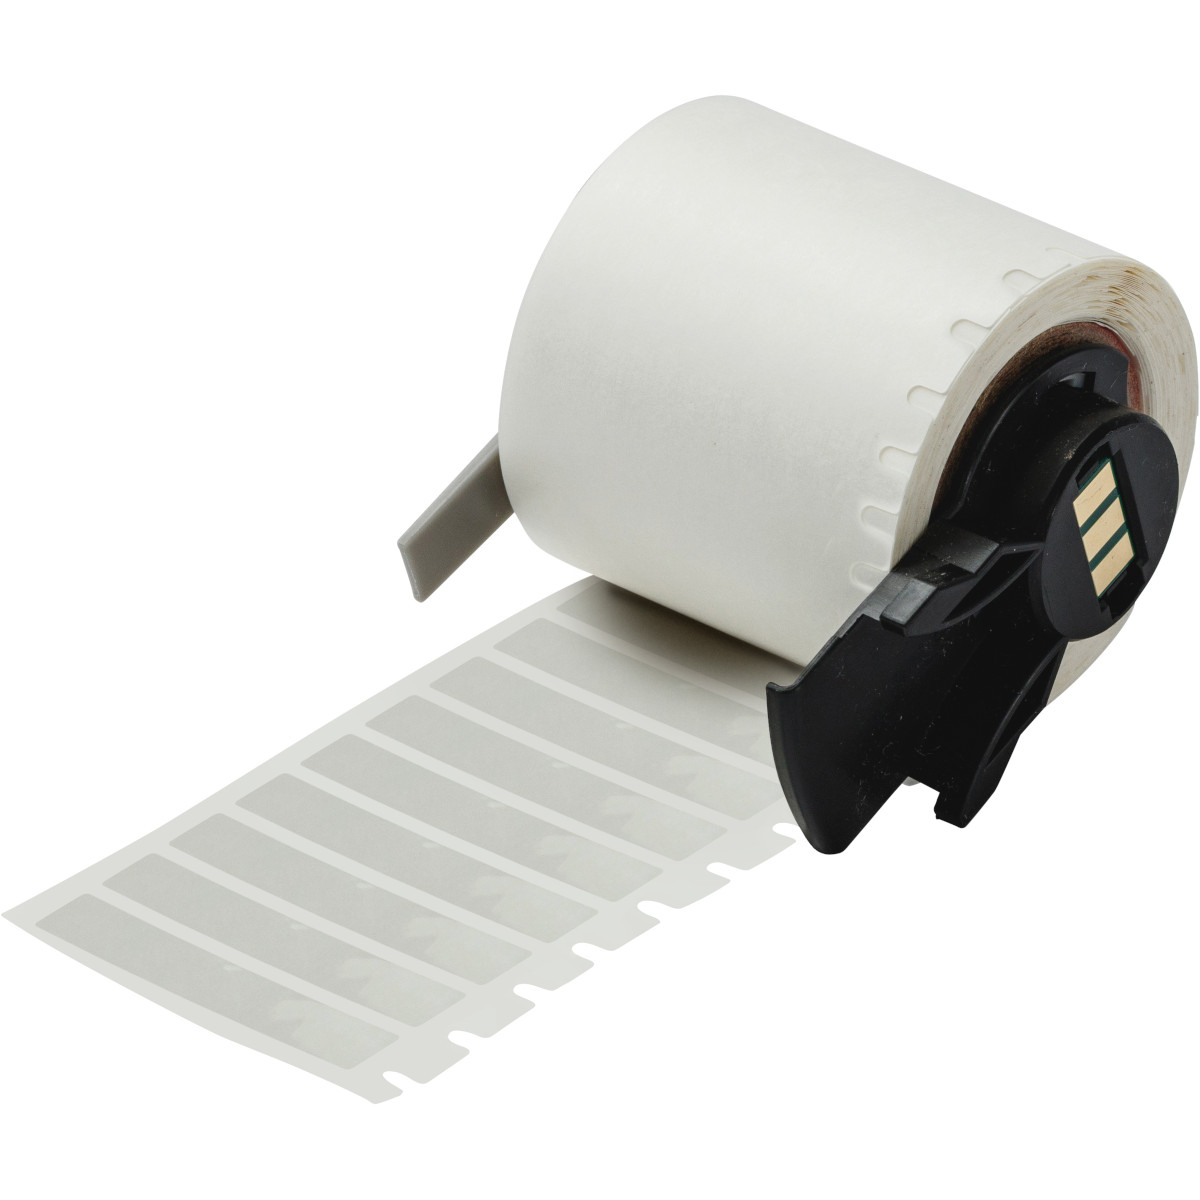 Polyester Labels for M611, M610 & M710 Printers - 5.08mm (H) x 39.00mm (W), Clear, M6-5-430-TL, Roll of 300 Labels